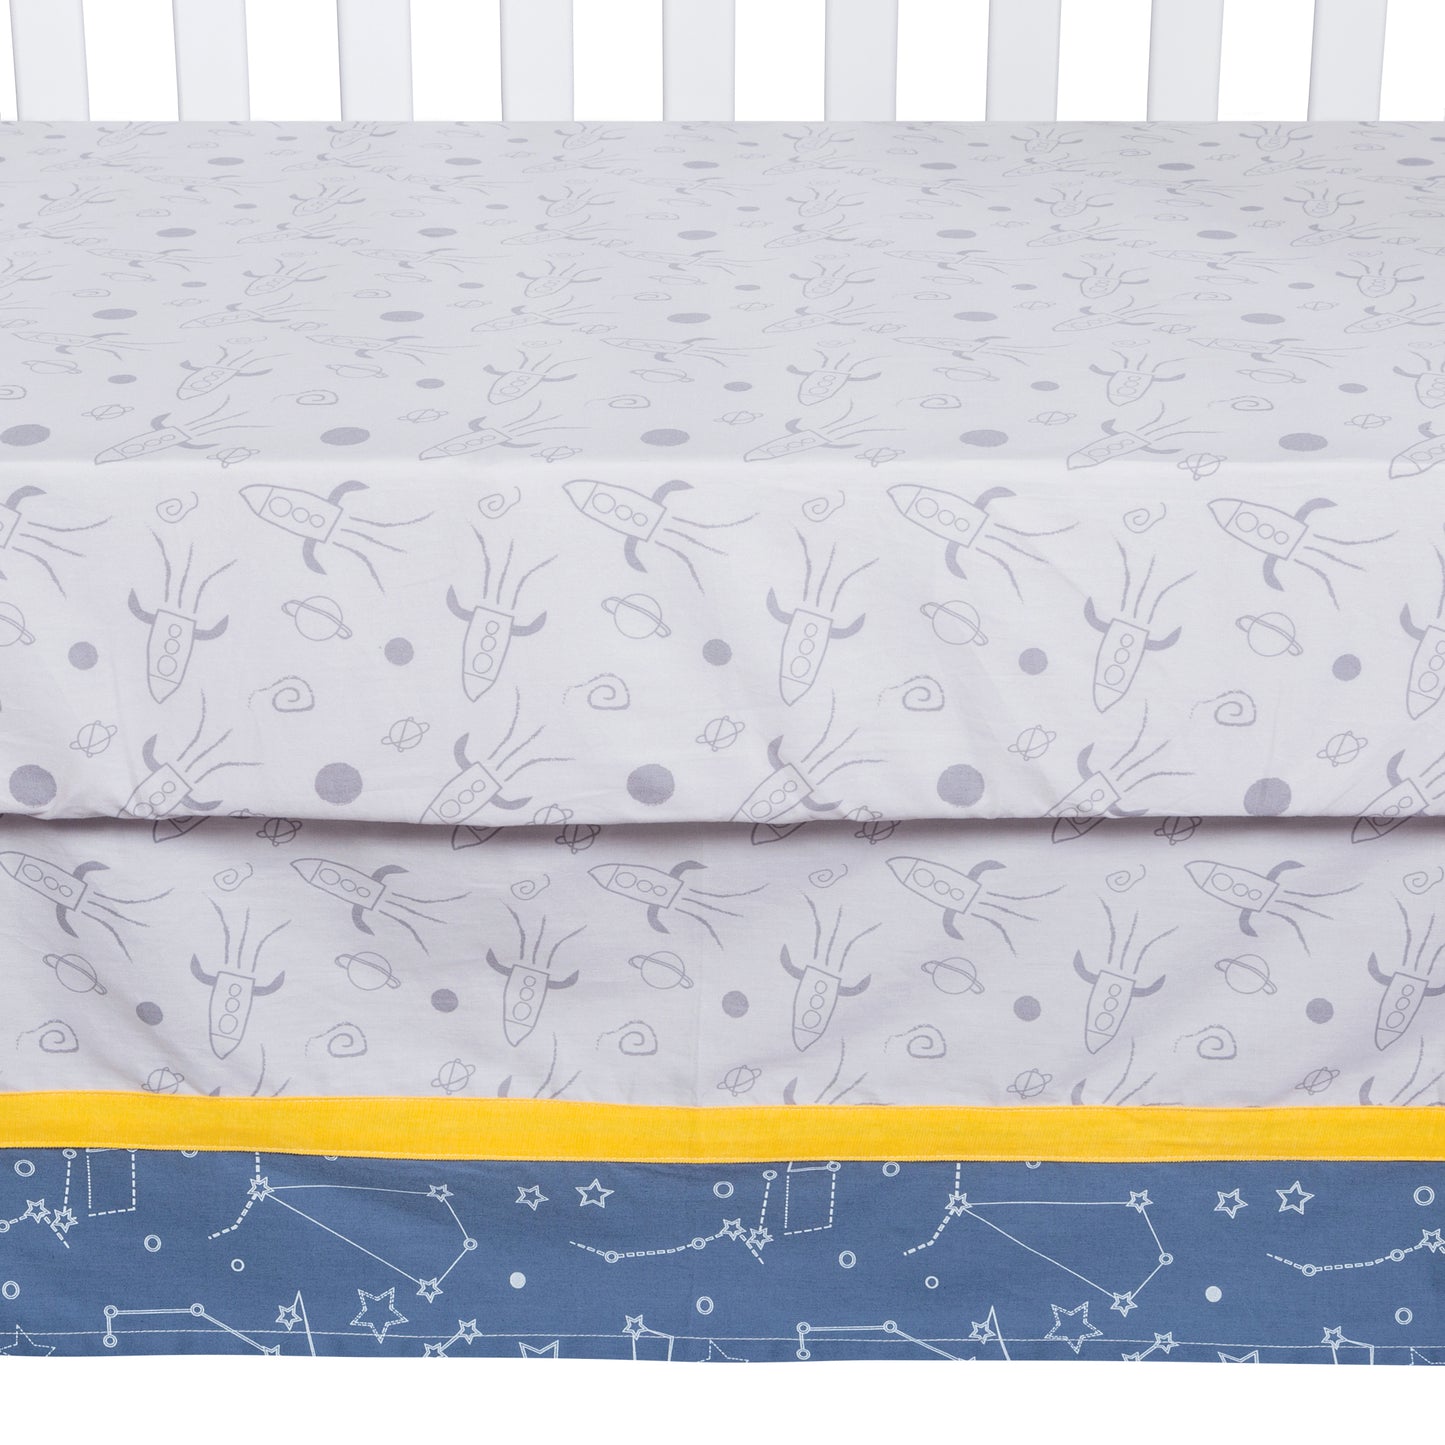 Flat panel crib skirt with 13 inch drop features a rocket ships scatter print body, star constellations trim in navy blue, gray and white with a solid yellow accent.